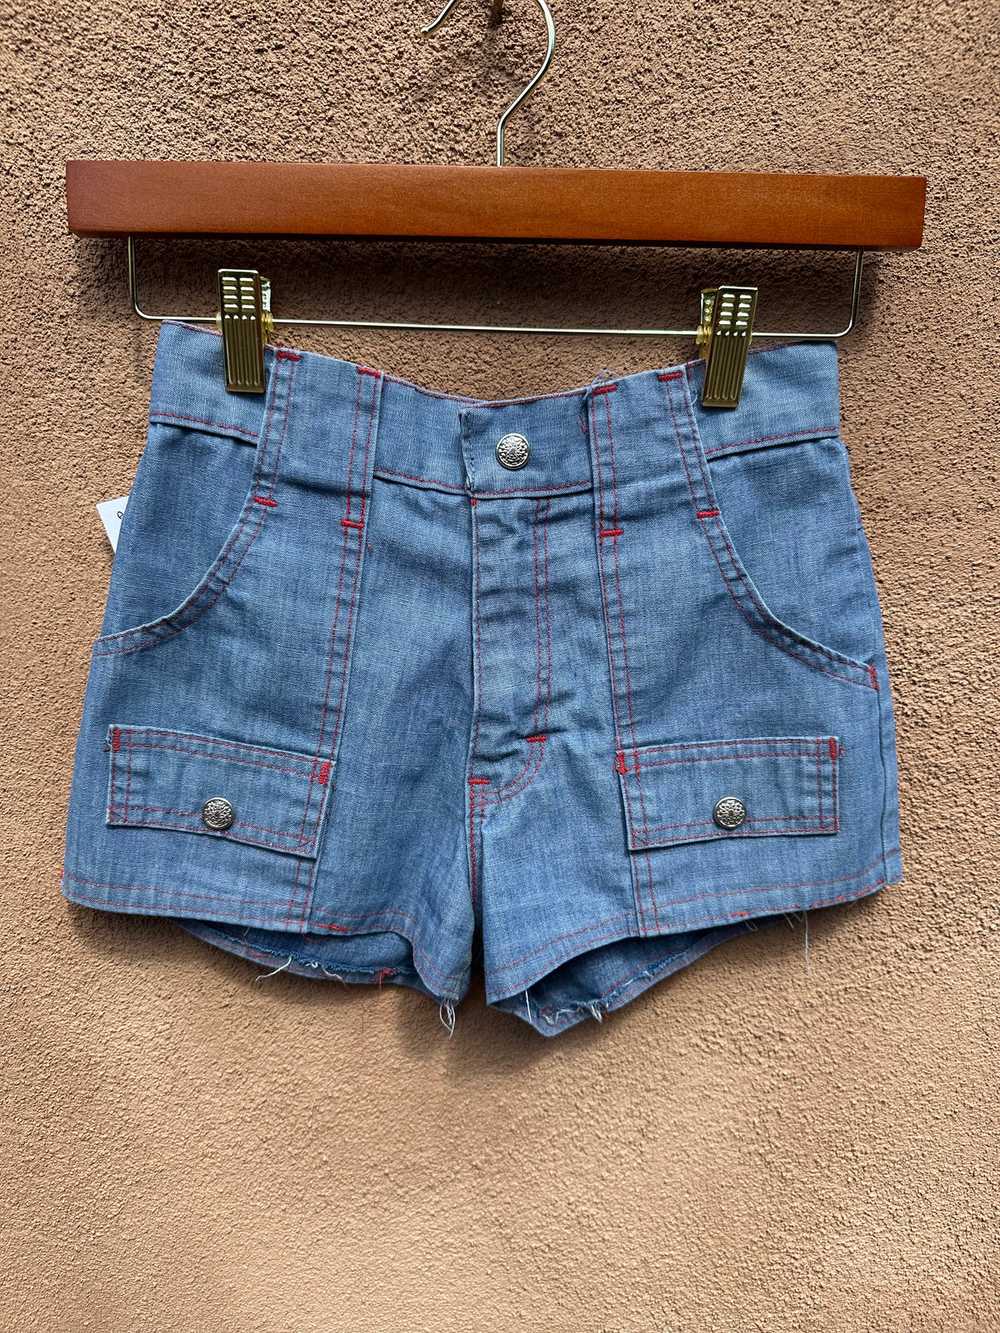 1960's Growing Girl Perma-Prest Shorts - Size 10 … - image 1